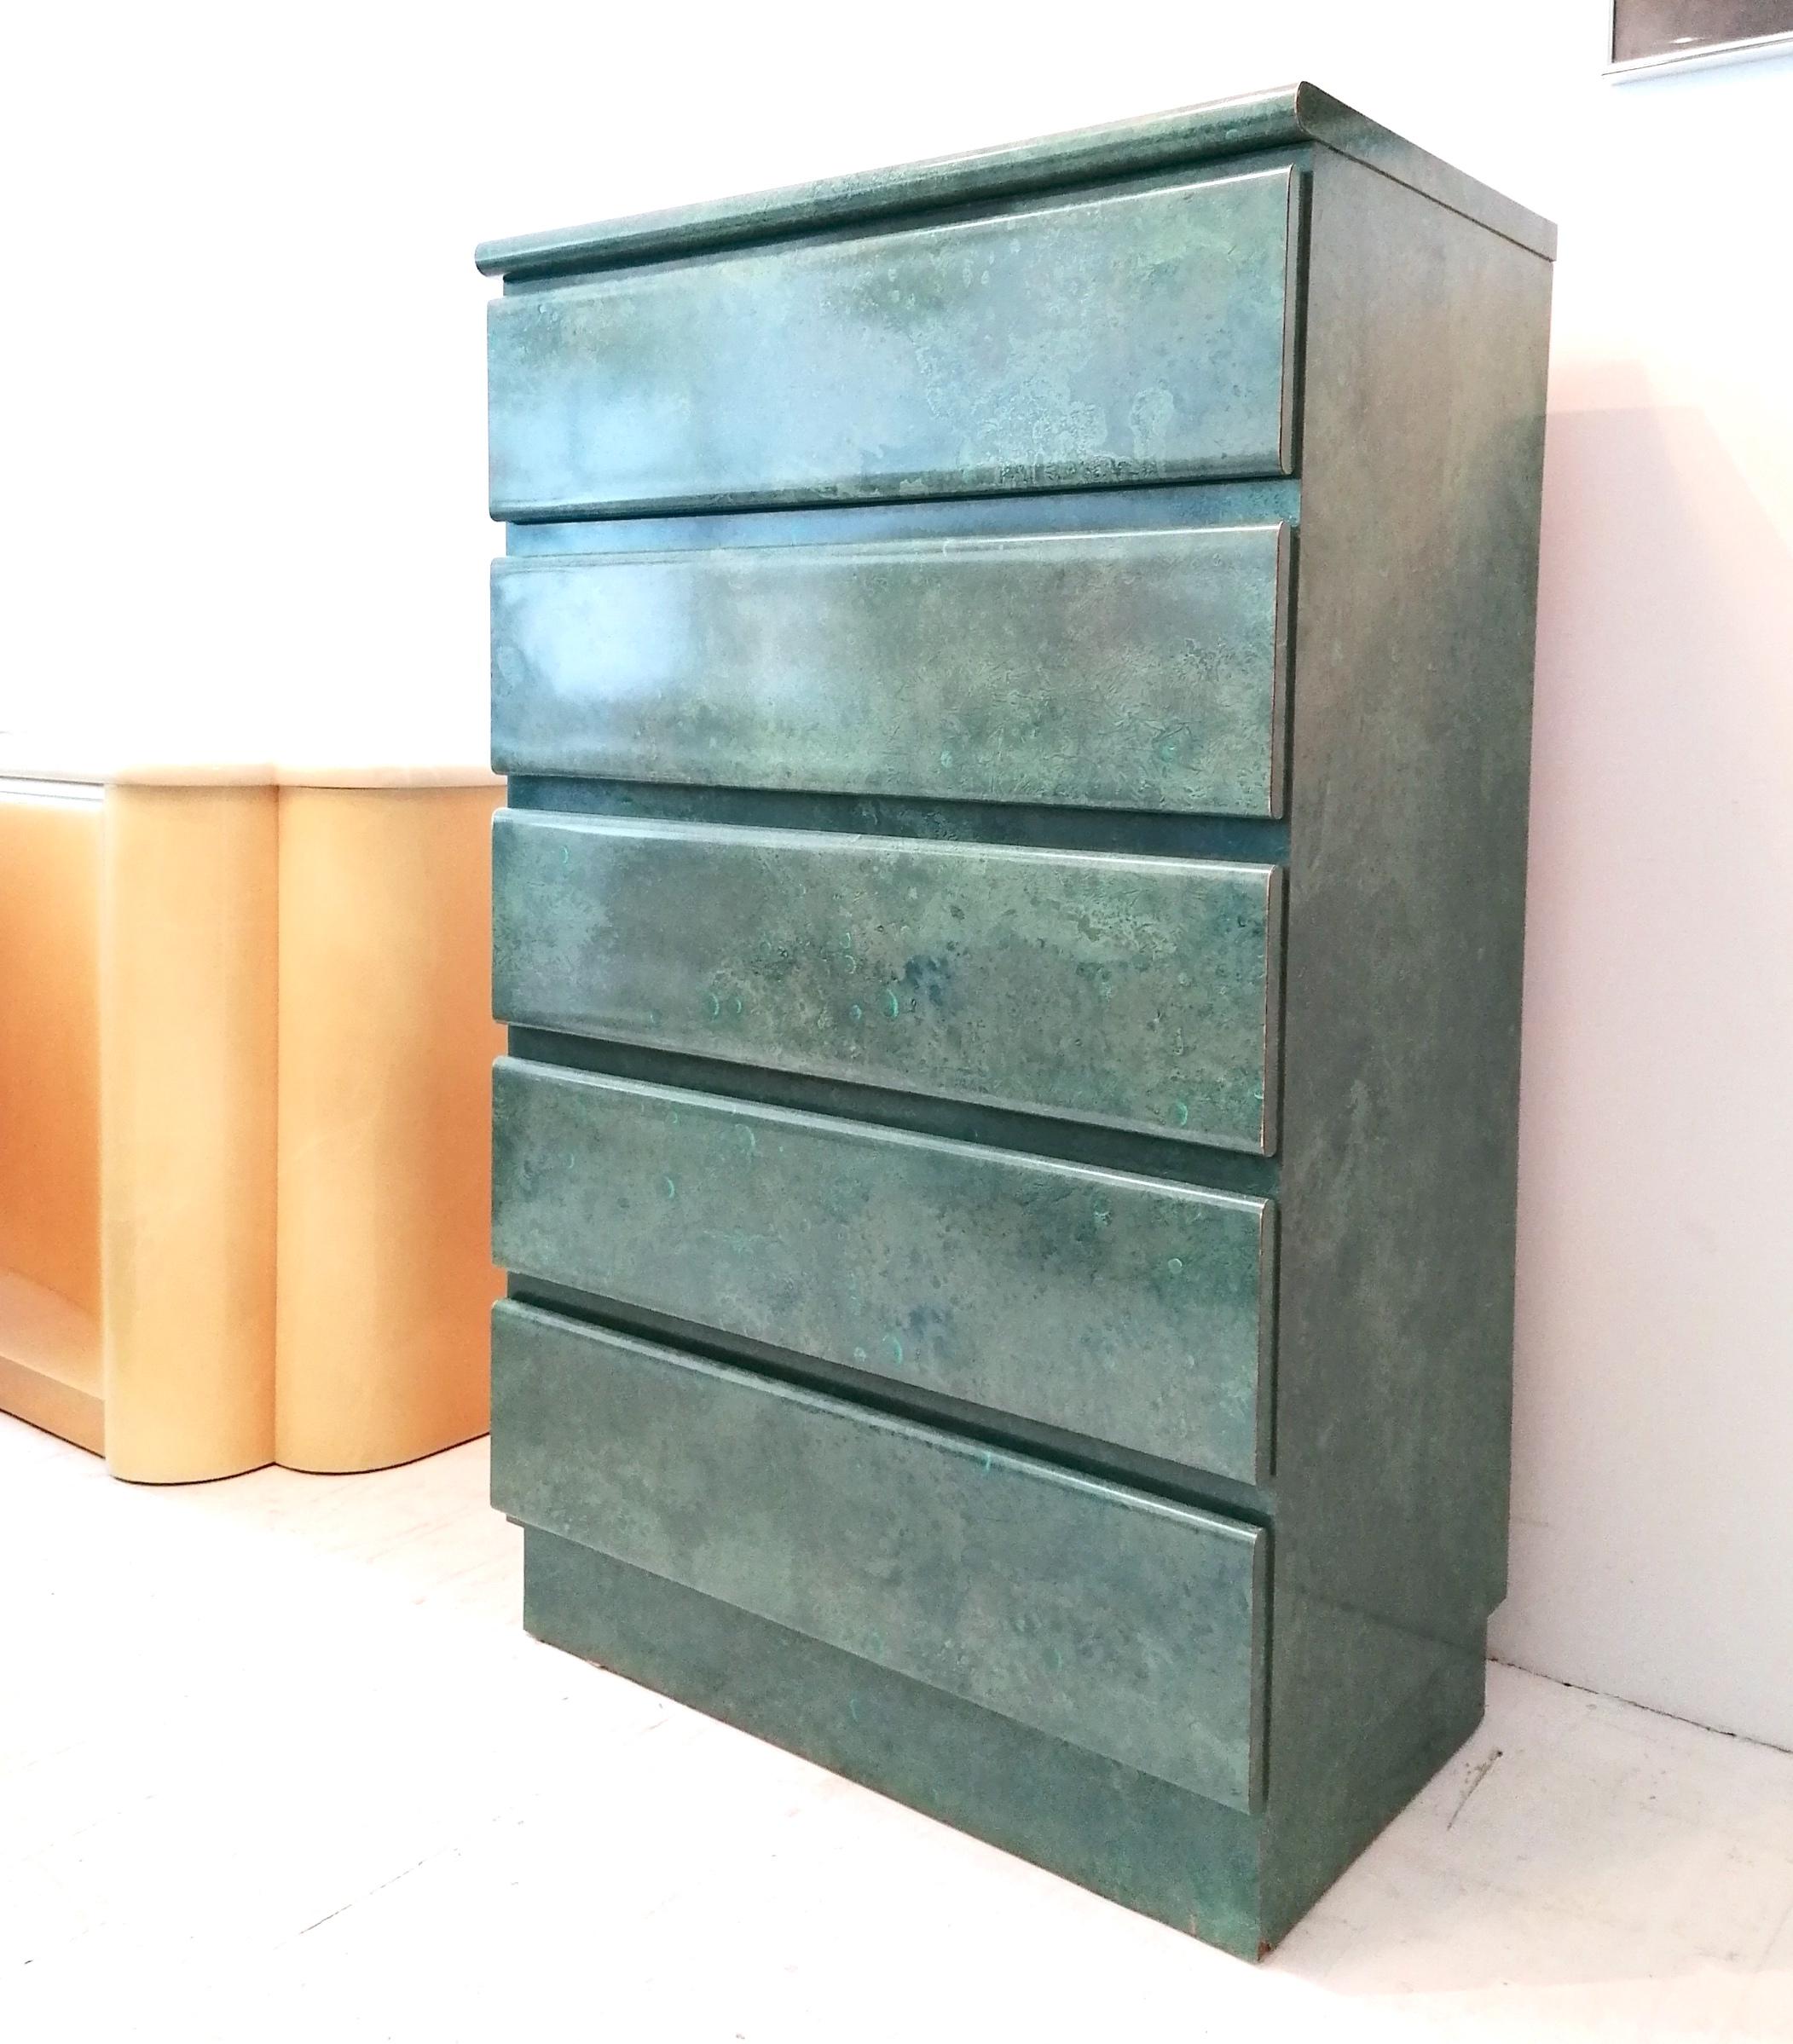 A stunning postmodern 1980s lacquer laminate tall drawer cabinet with 5 large drawers, in a beautiful tonal aqua/jade/green finish. All drawers run smoothly. Sourced in Miami, Florida.